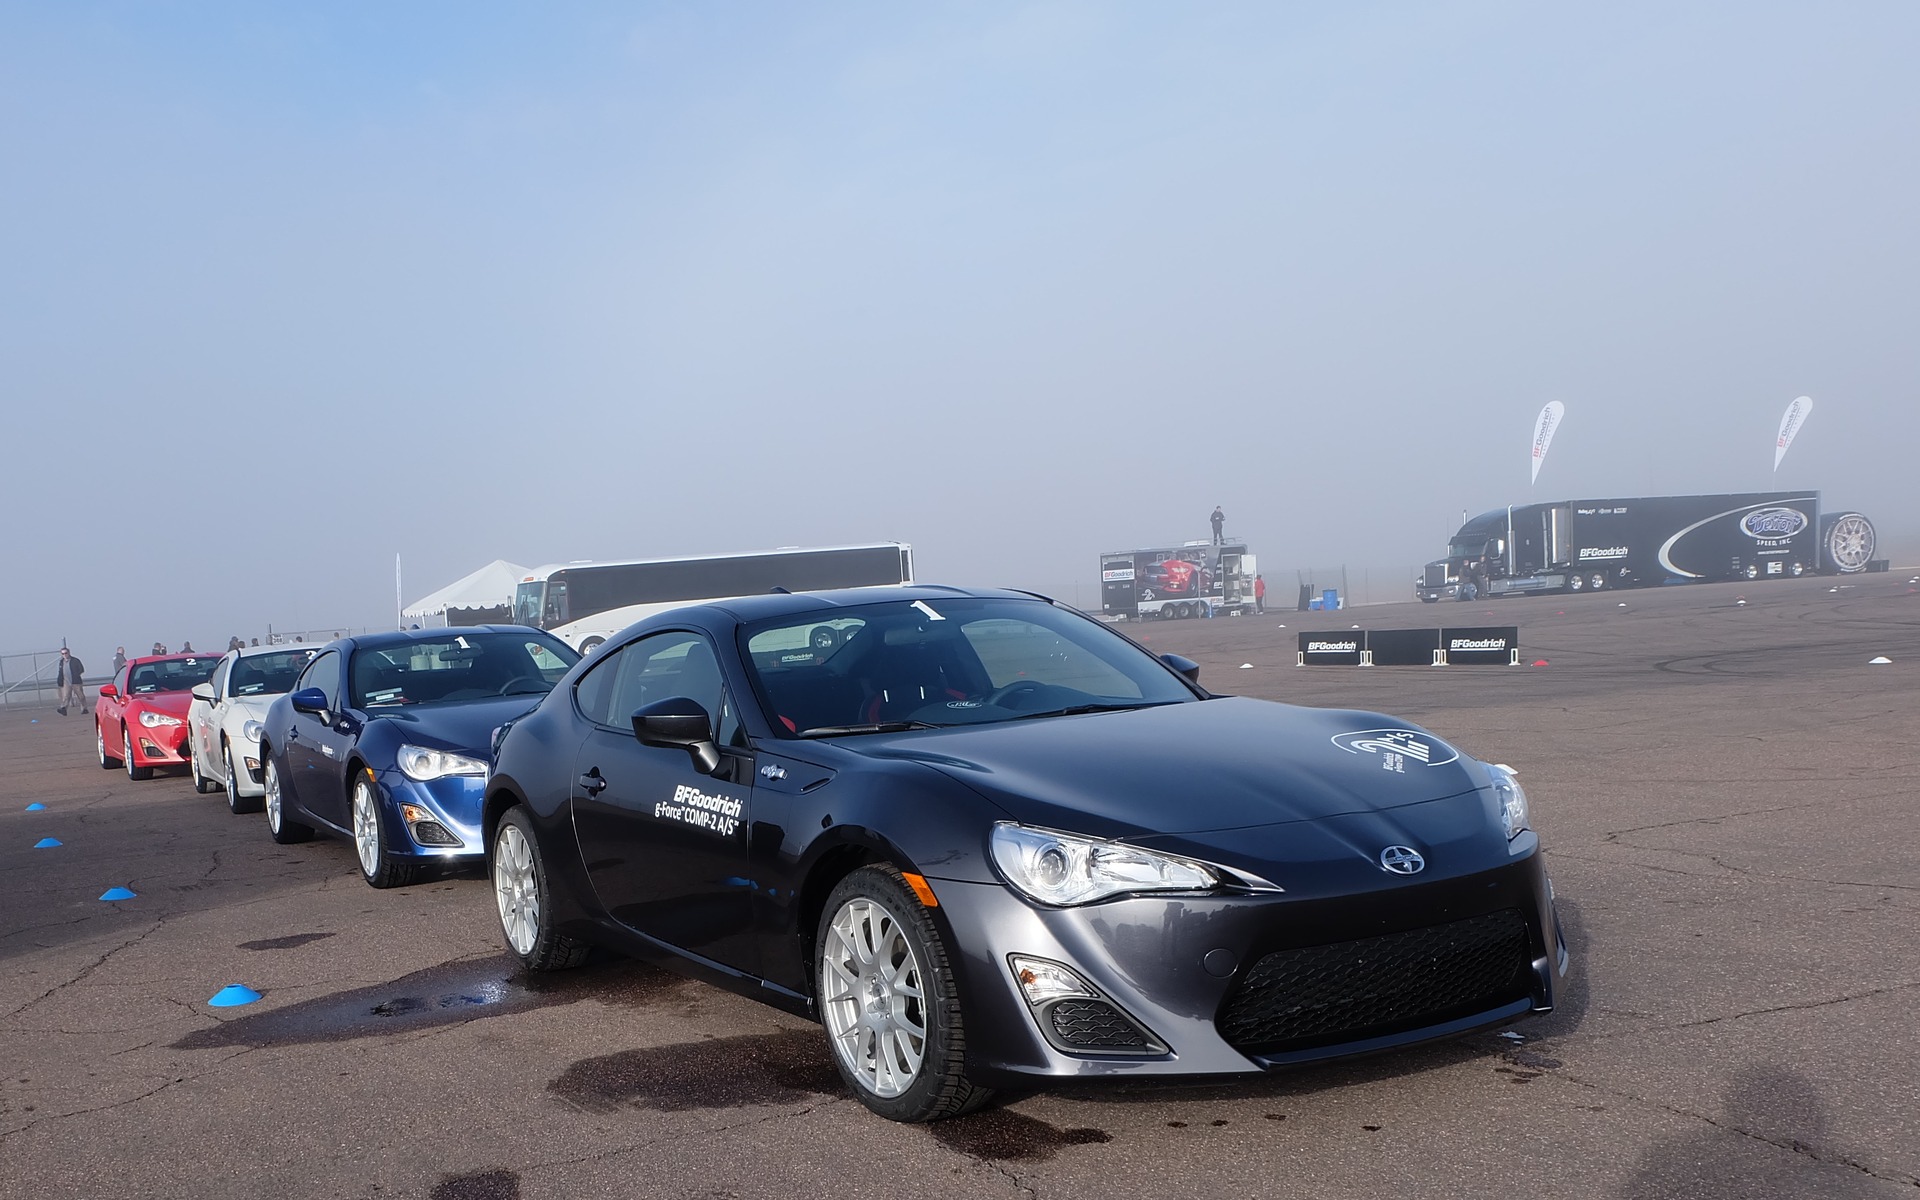 After the Mustang, we tested the Scion FR-S!